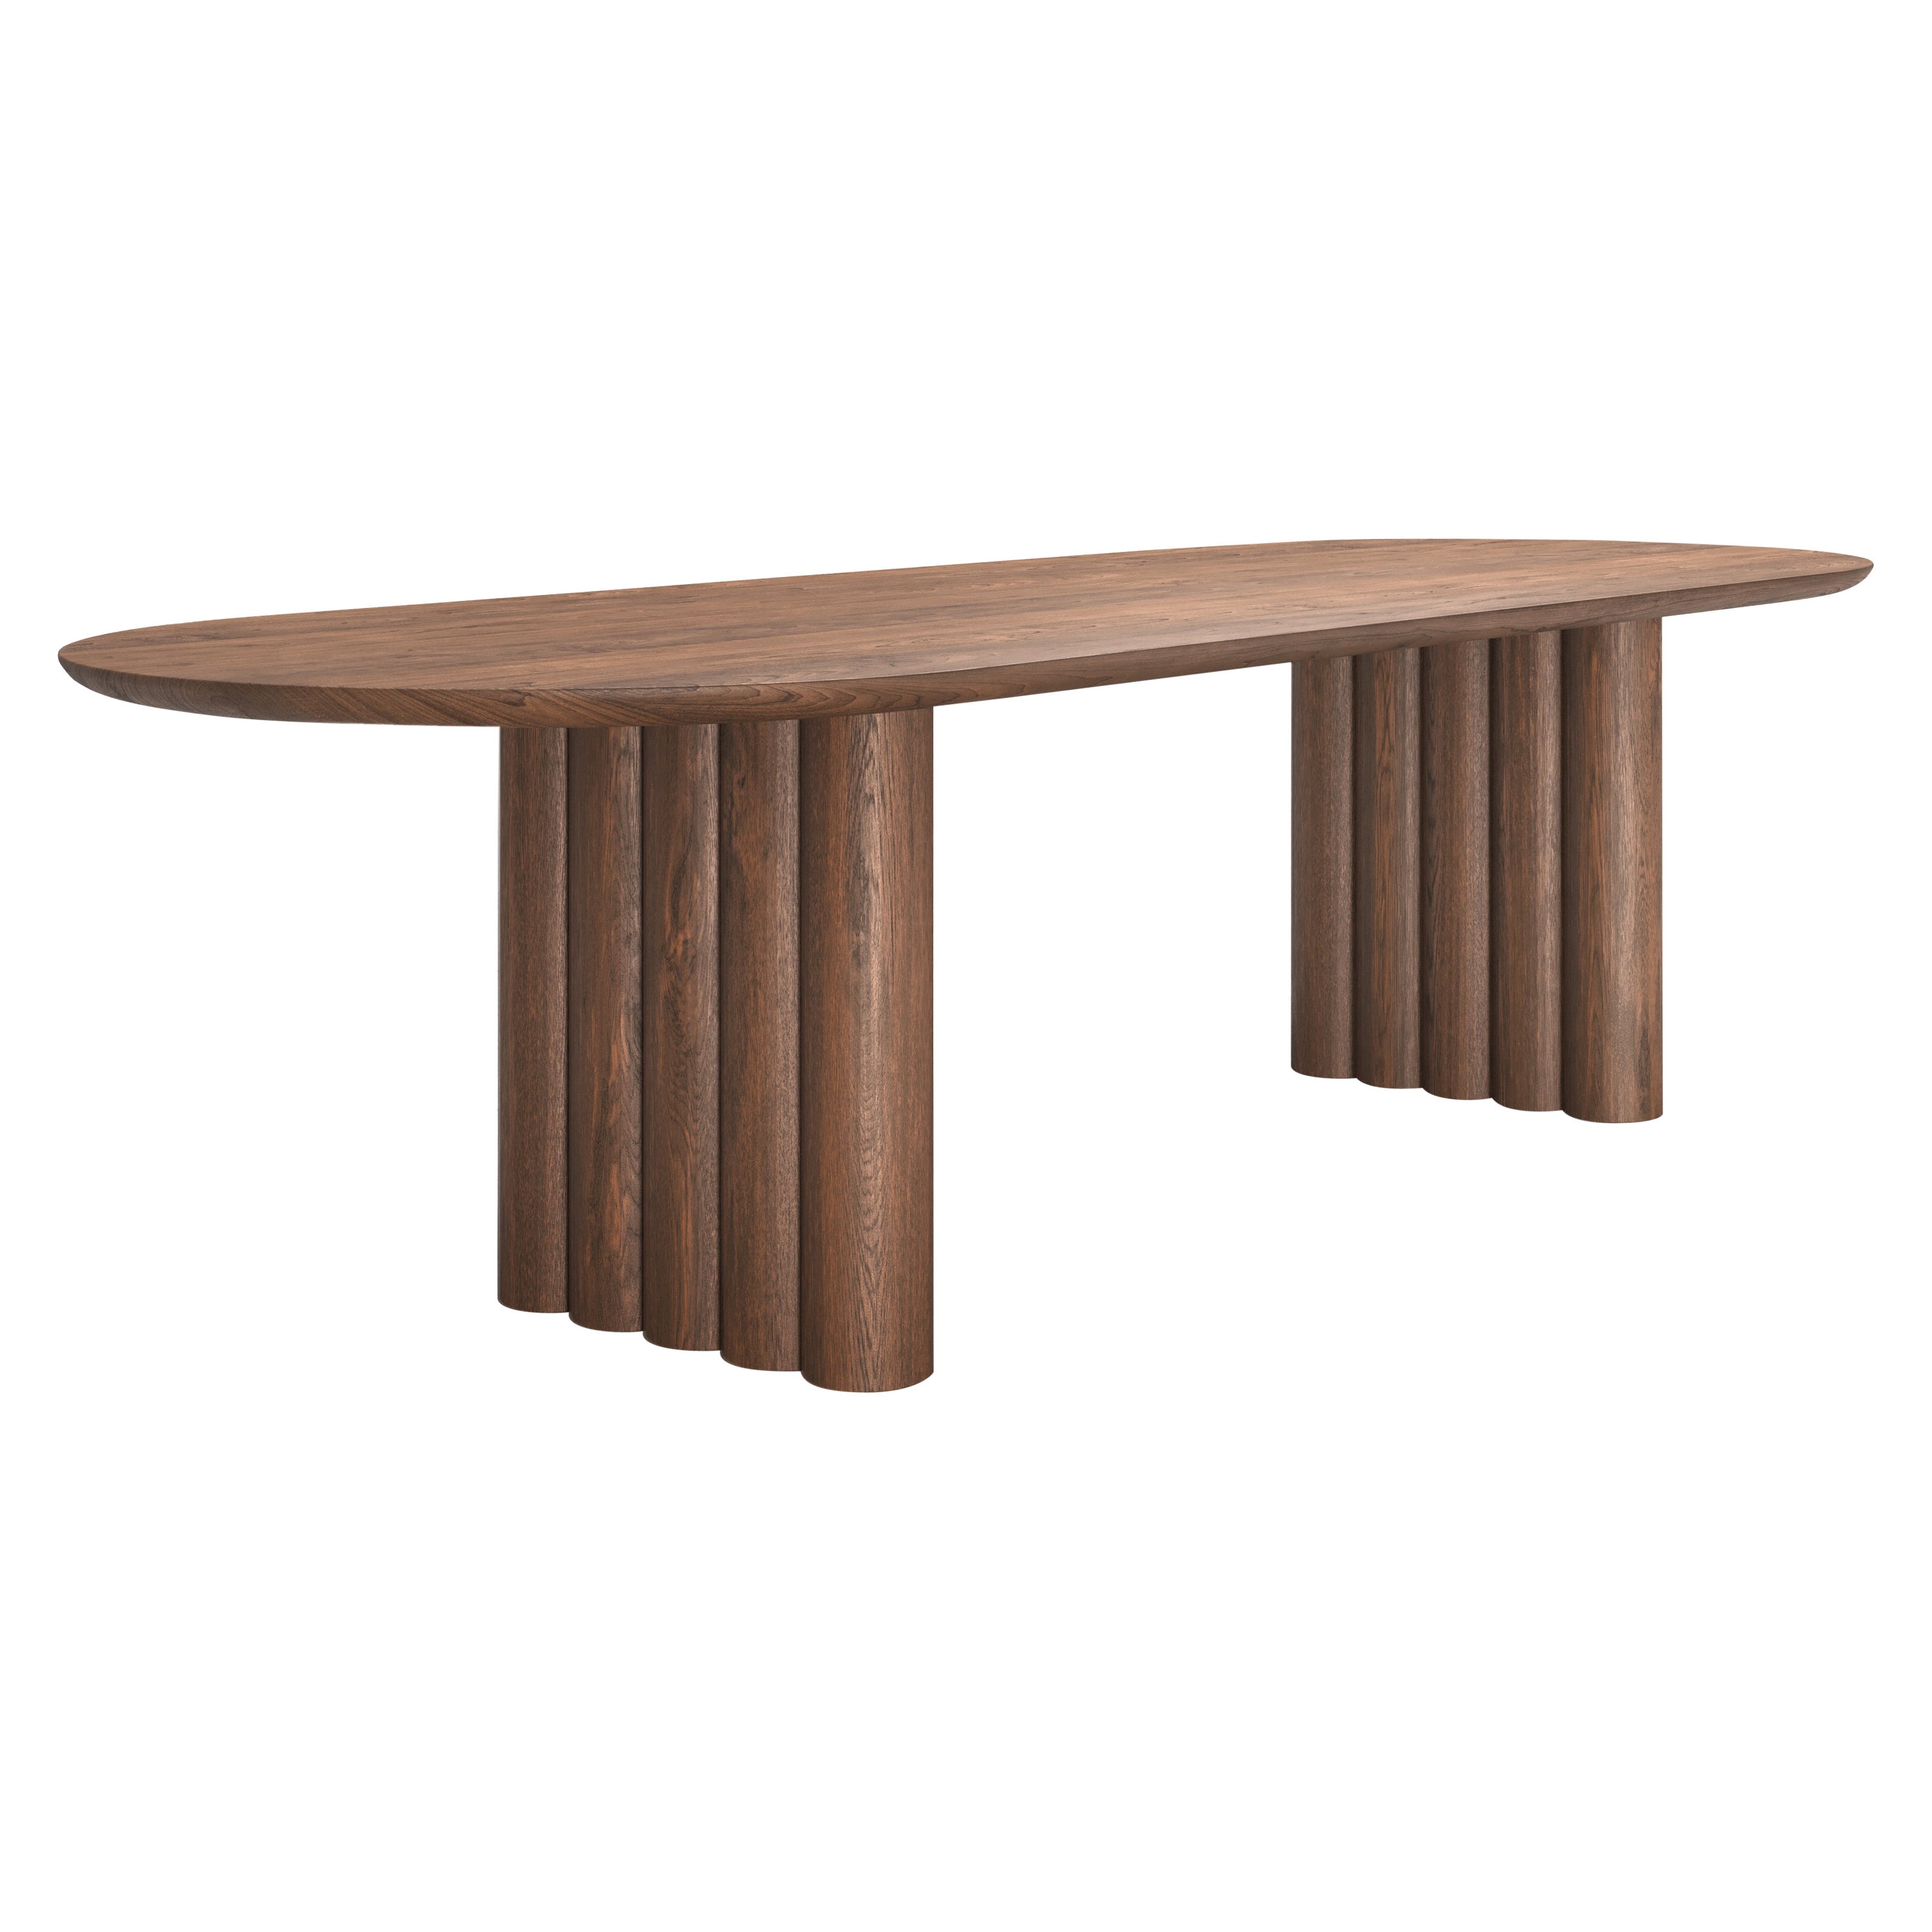 Contemporary Dining Table 'Plush' by Dk3, Smoked Oak or Walnut, 340